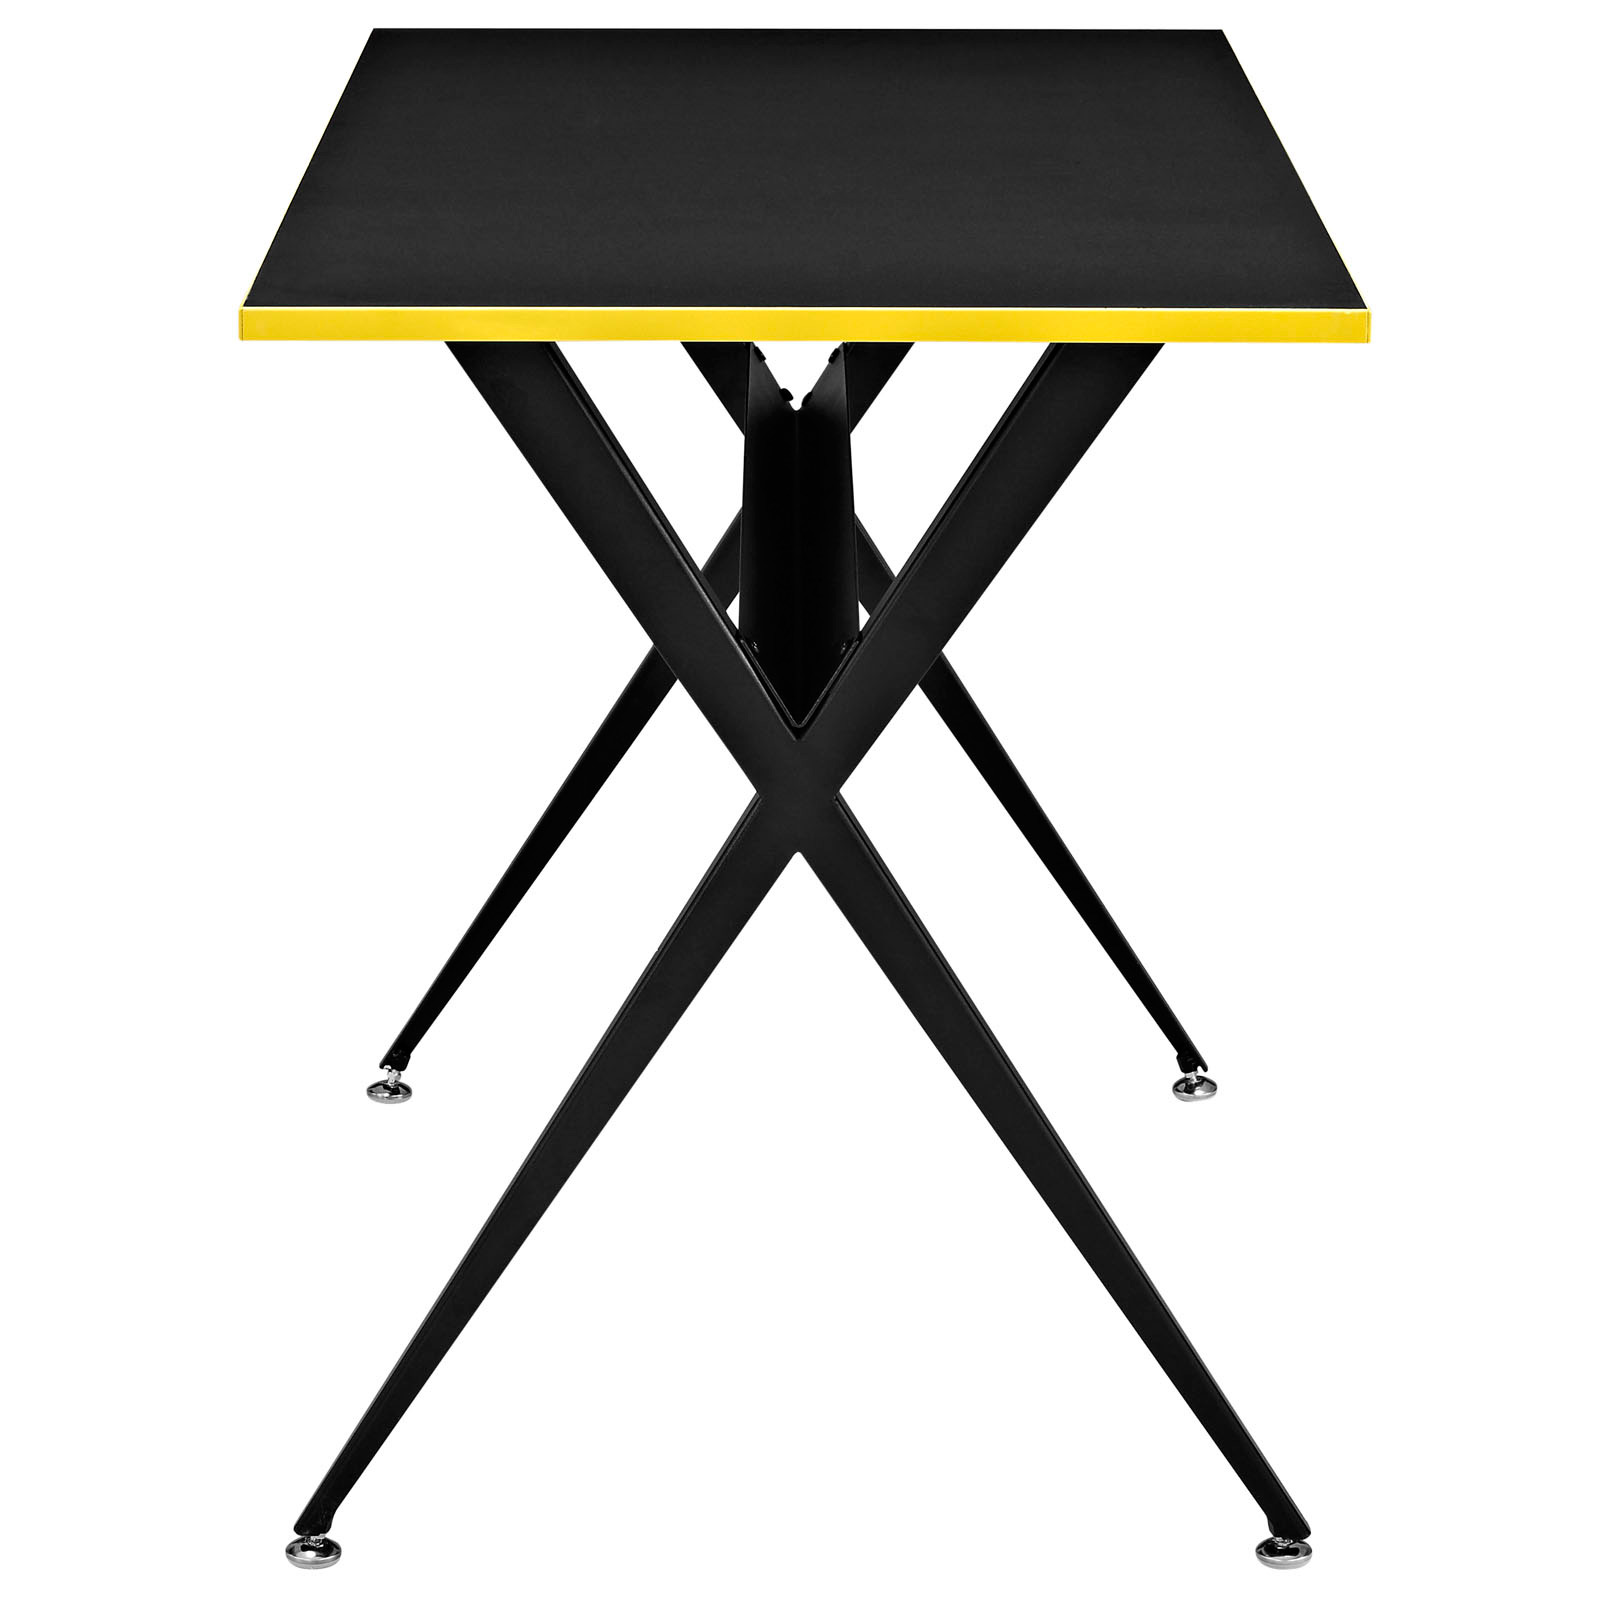 Space saving desk from Modway - Side View - Shown in Black